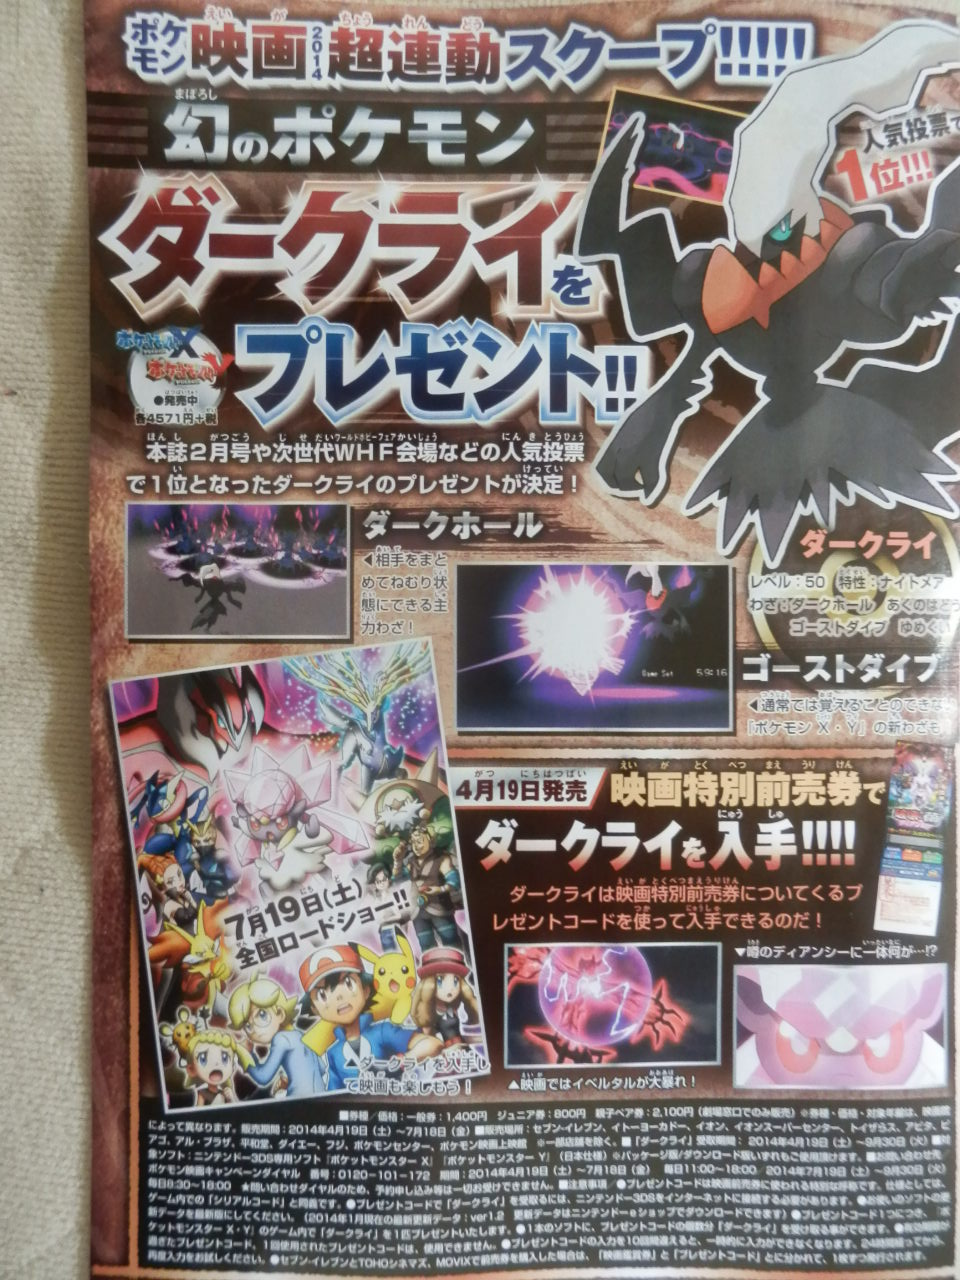 Corocoro Comic S April Issue Details The Movie S Preorder Ticket Event Pocketmonsters Net